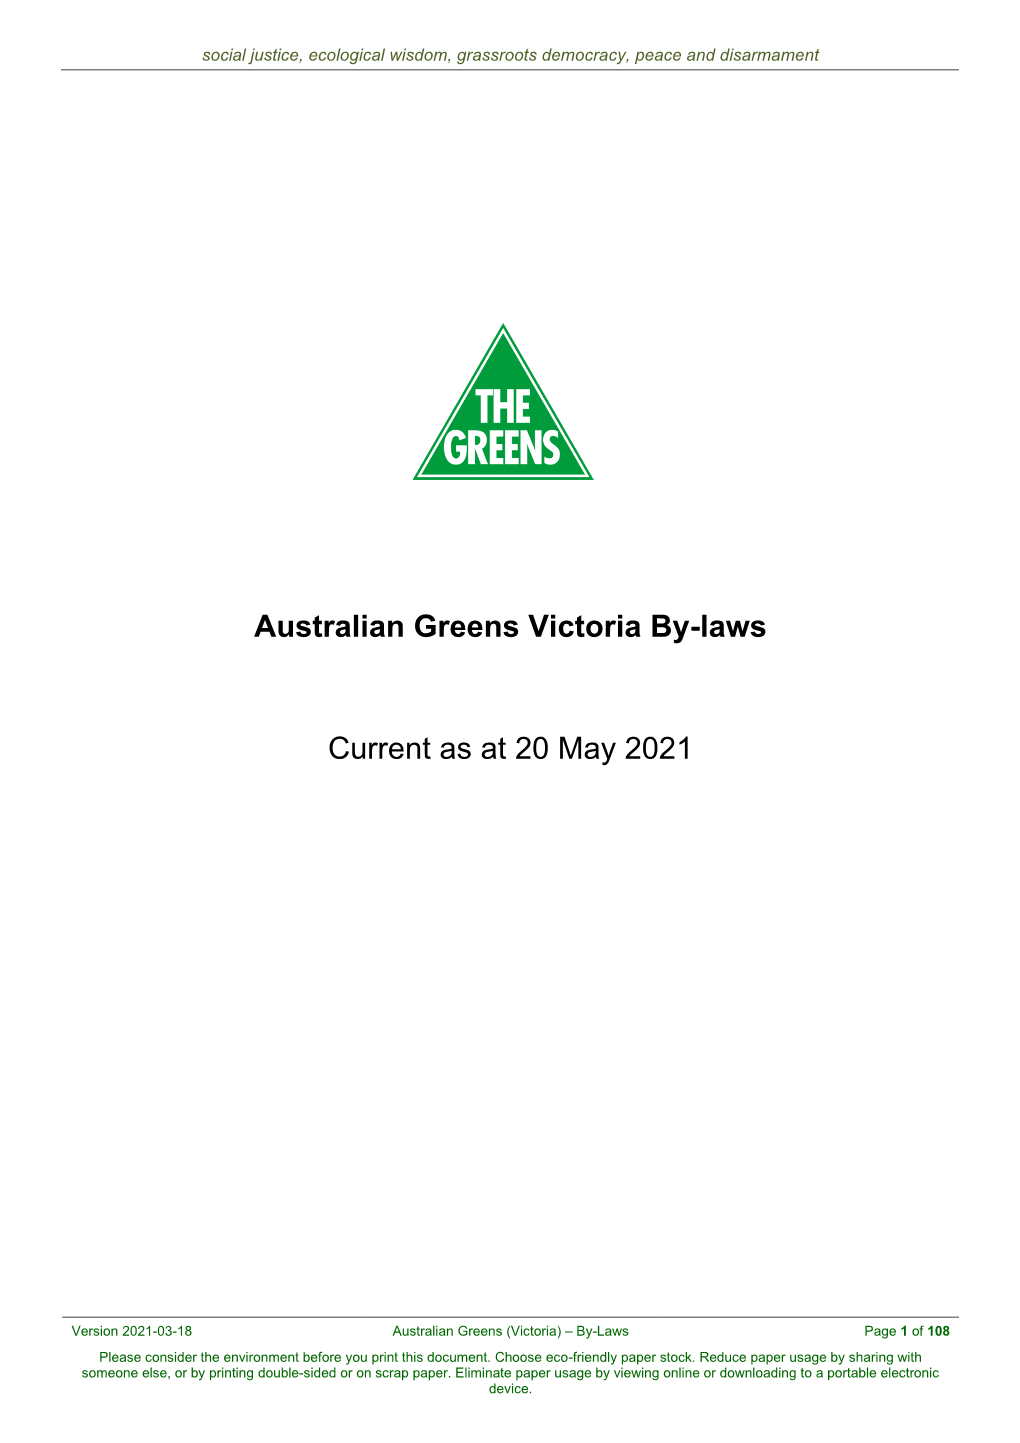 Australian Greens Victoria By-Laws Current As at 20 May 2021